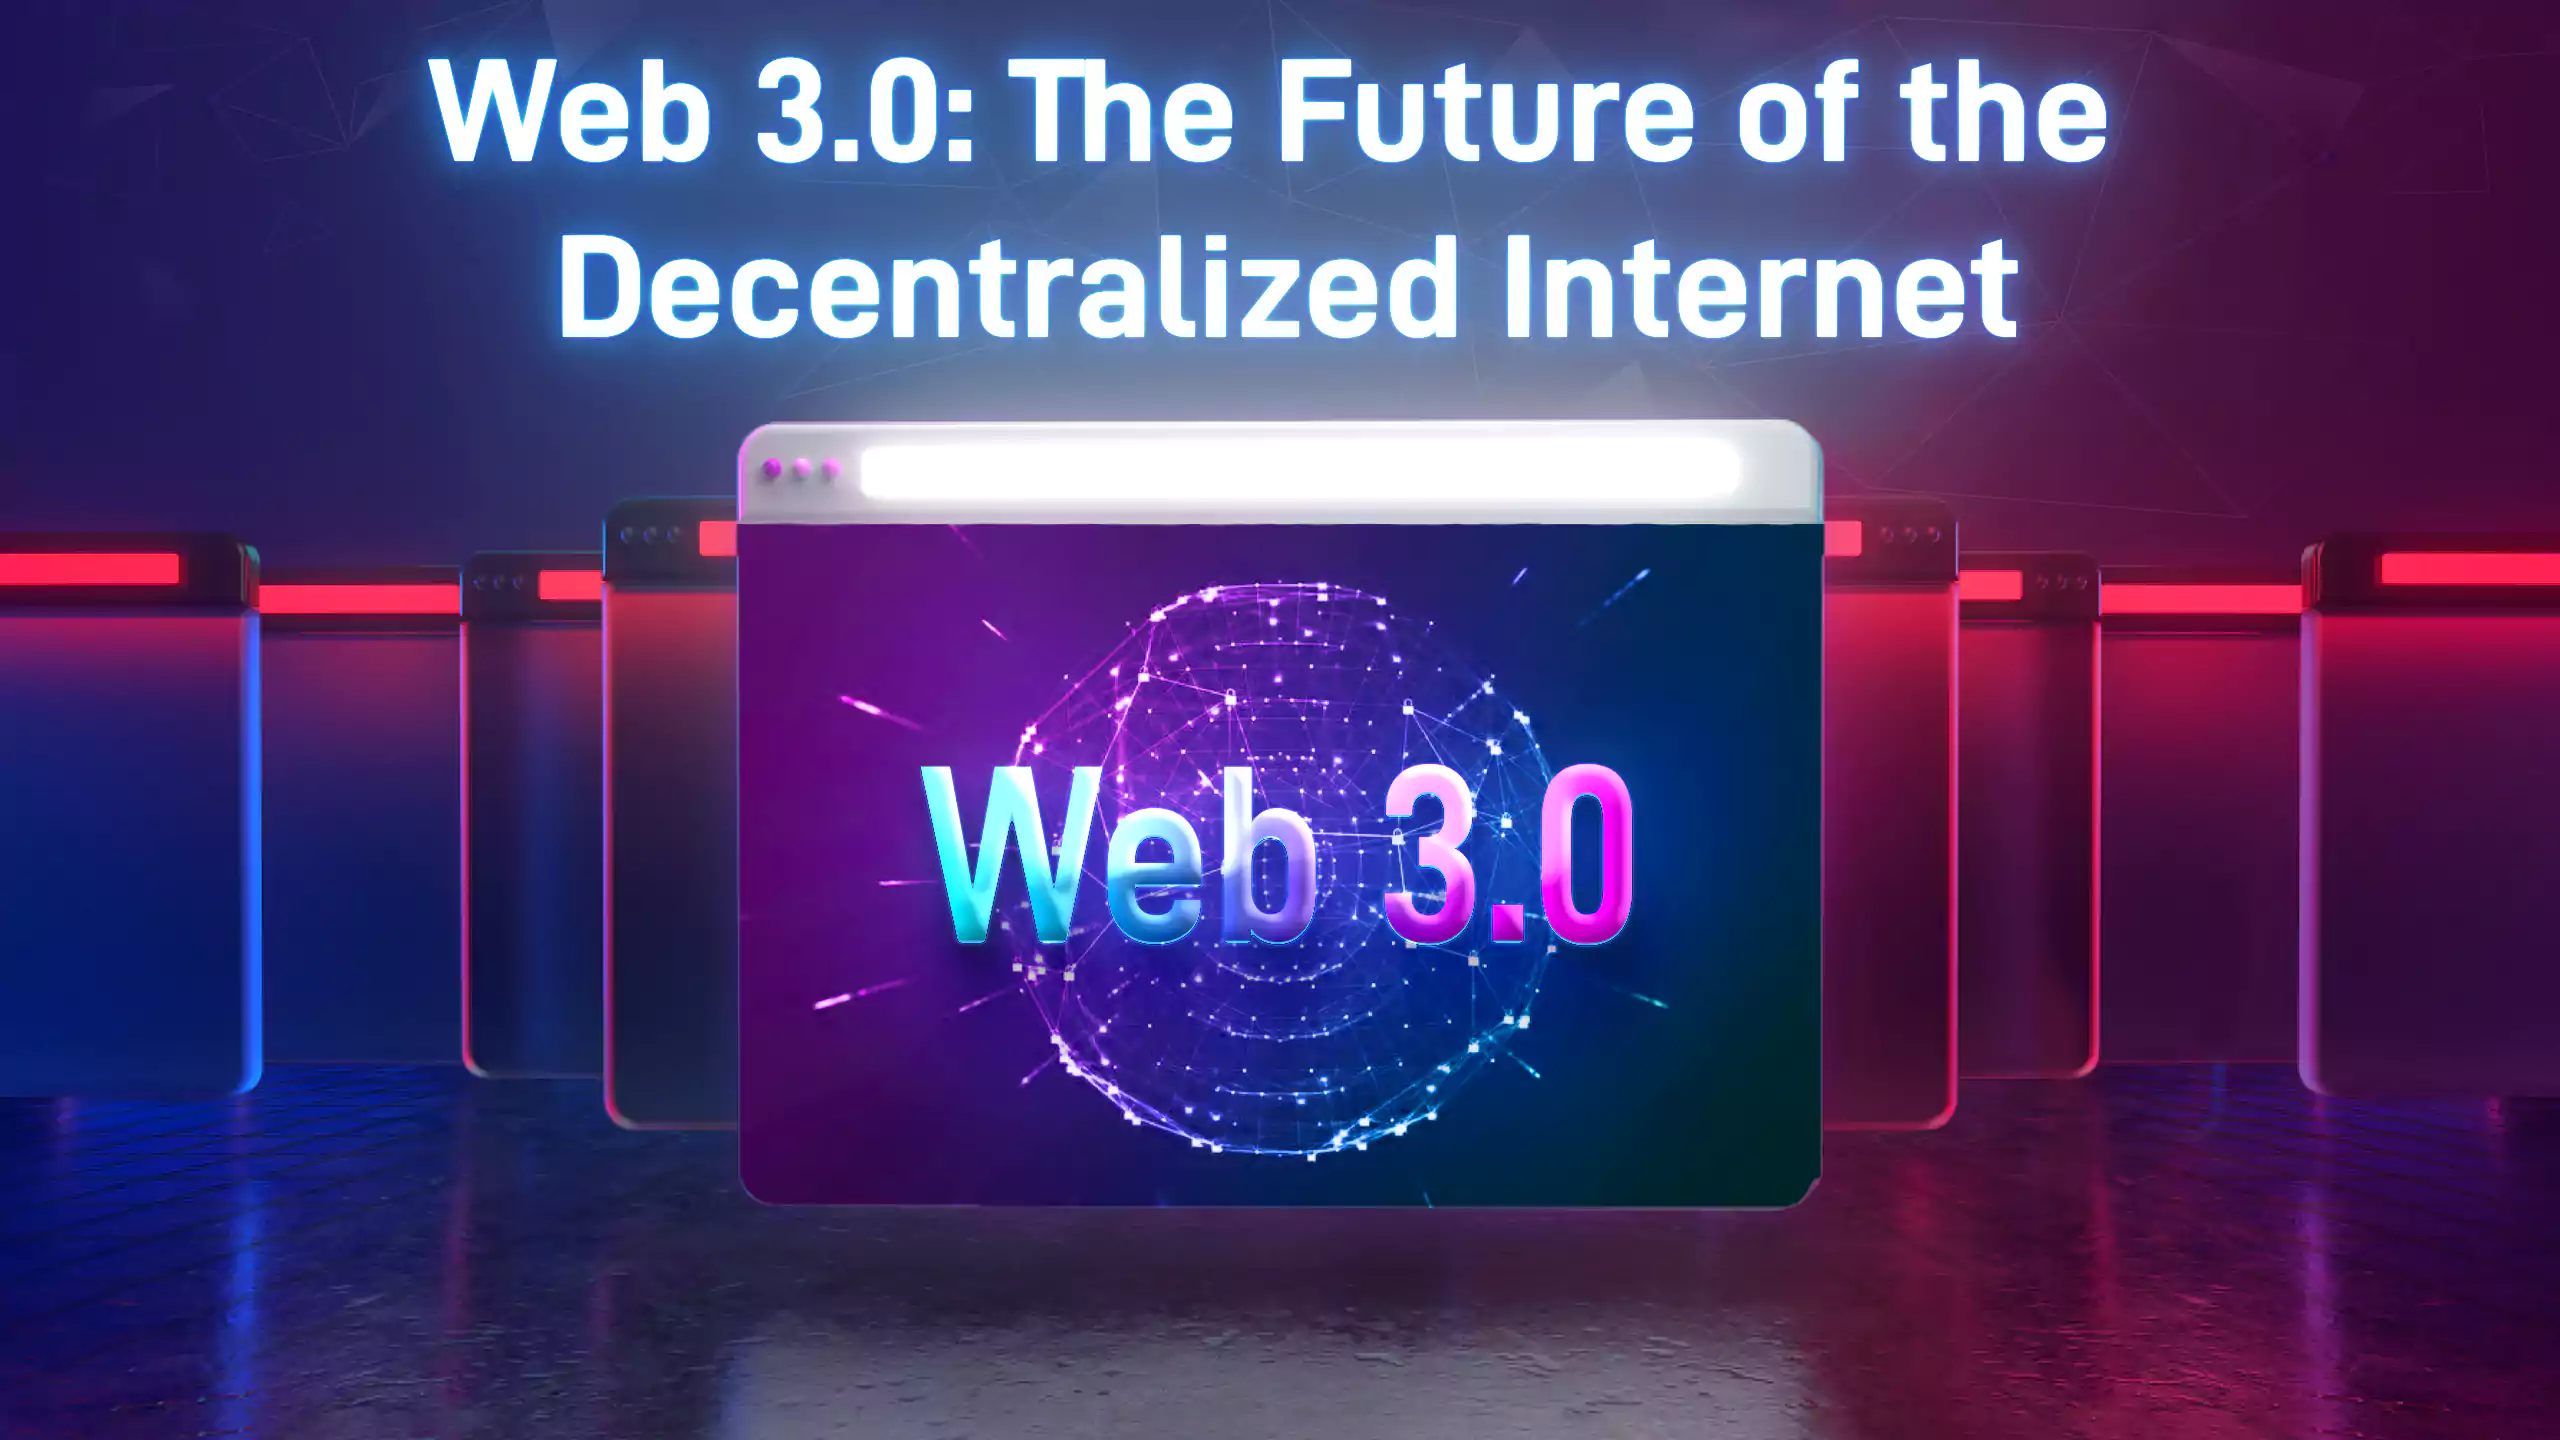 Web 3.0: The Future of the Decentralized Internet